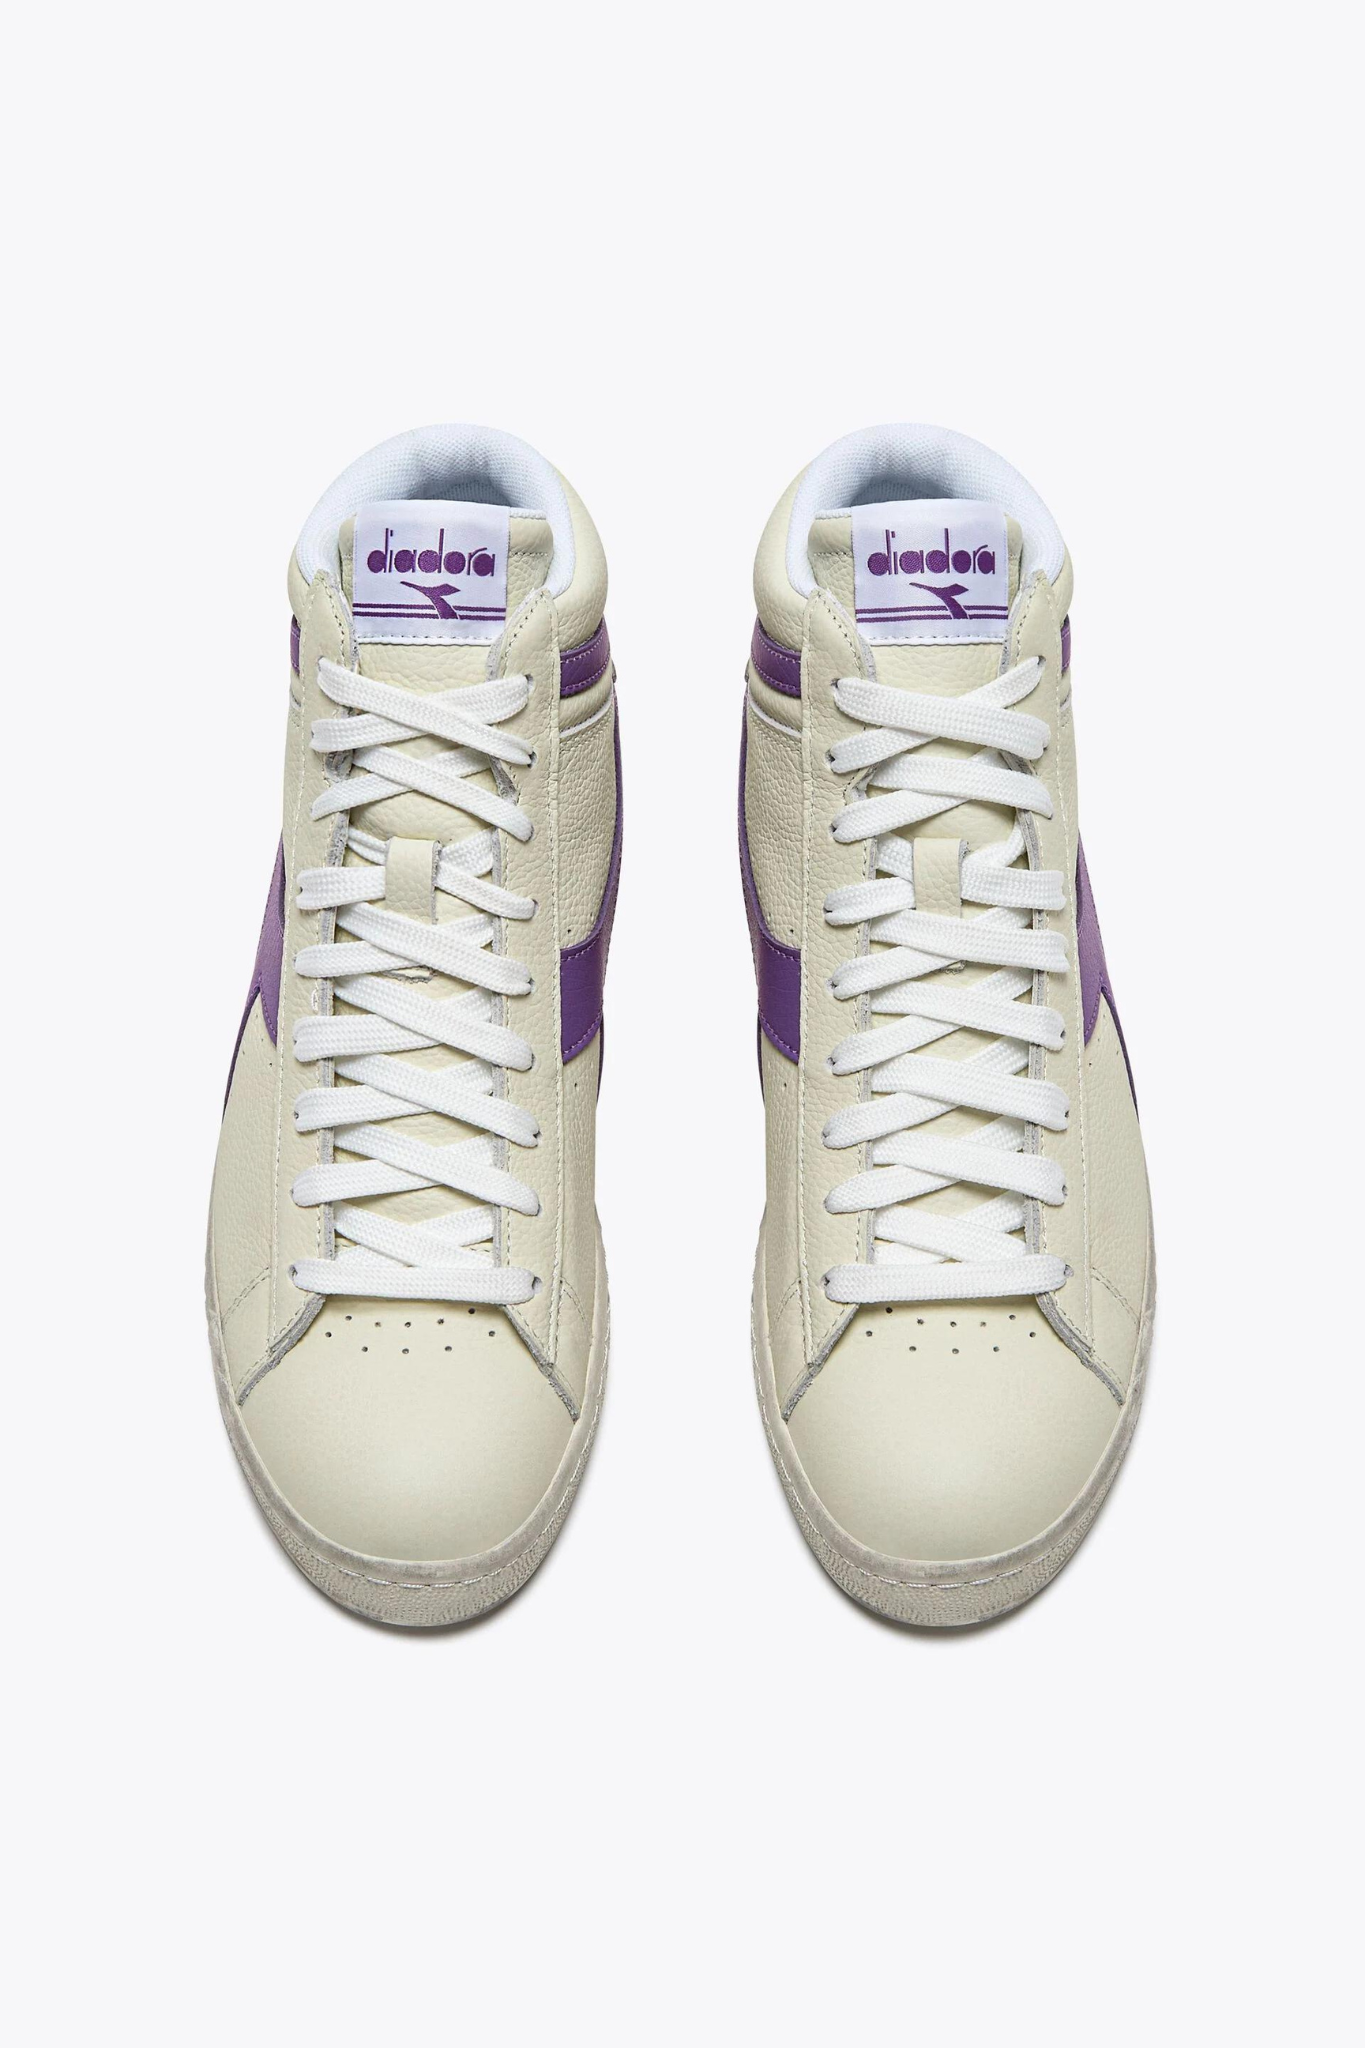 GAME L HIGH WAXED SNEAKER - WHITE/VIOLET BERRY